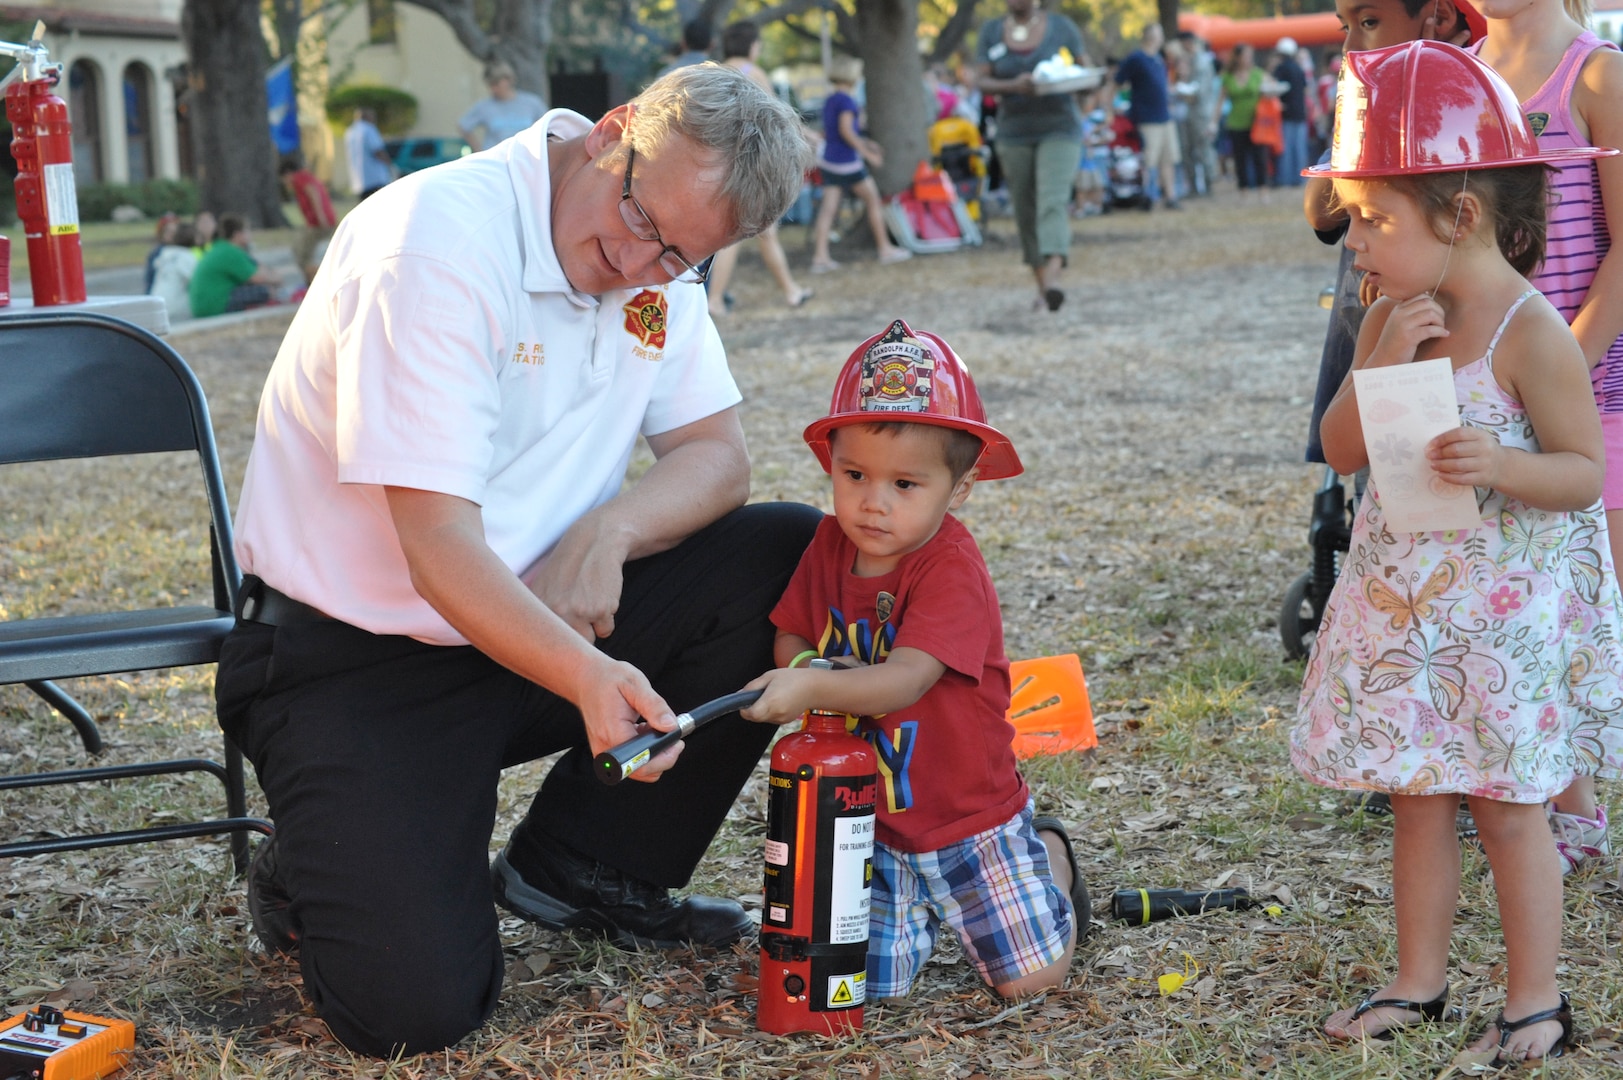 Scott Ridenour, 902nd Civil Engineer Squadron, teaches Fernando Leal how to use a fire extinguisher during the 2011 National Night Out event at Joint Base San Antonio-Randolph. This year's event is scheduled for Oct. 2. (U.S. Air Force photo by Airman 1st Class Alexis Siekert)